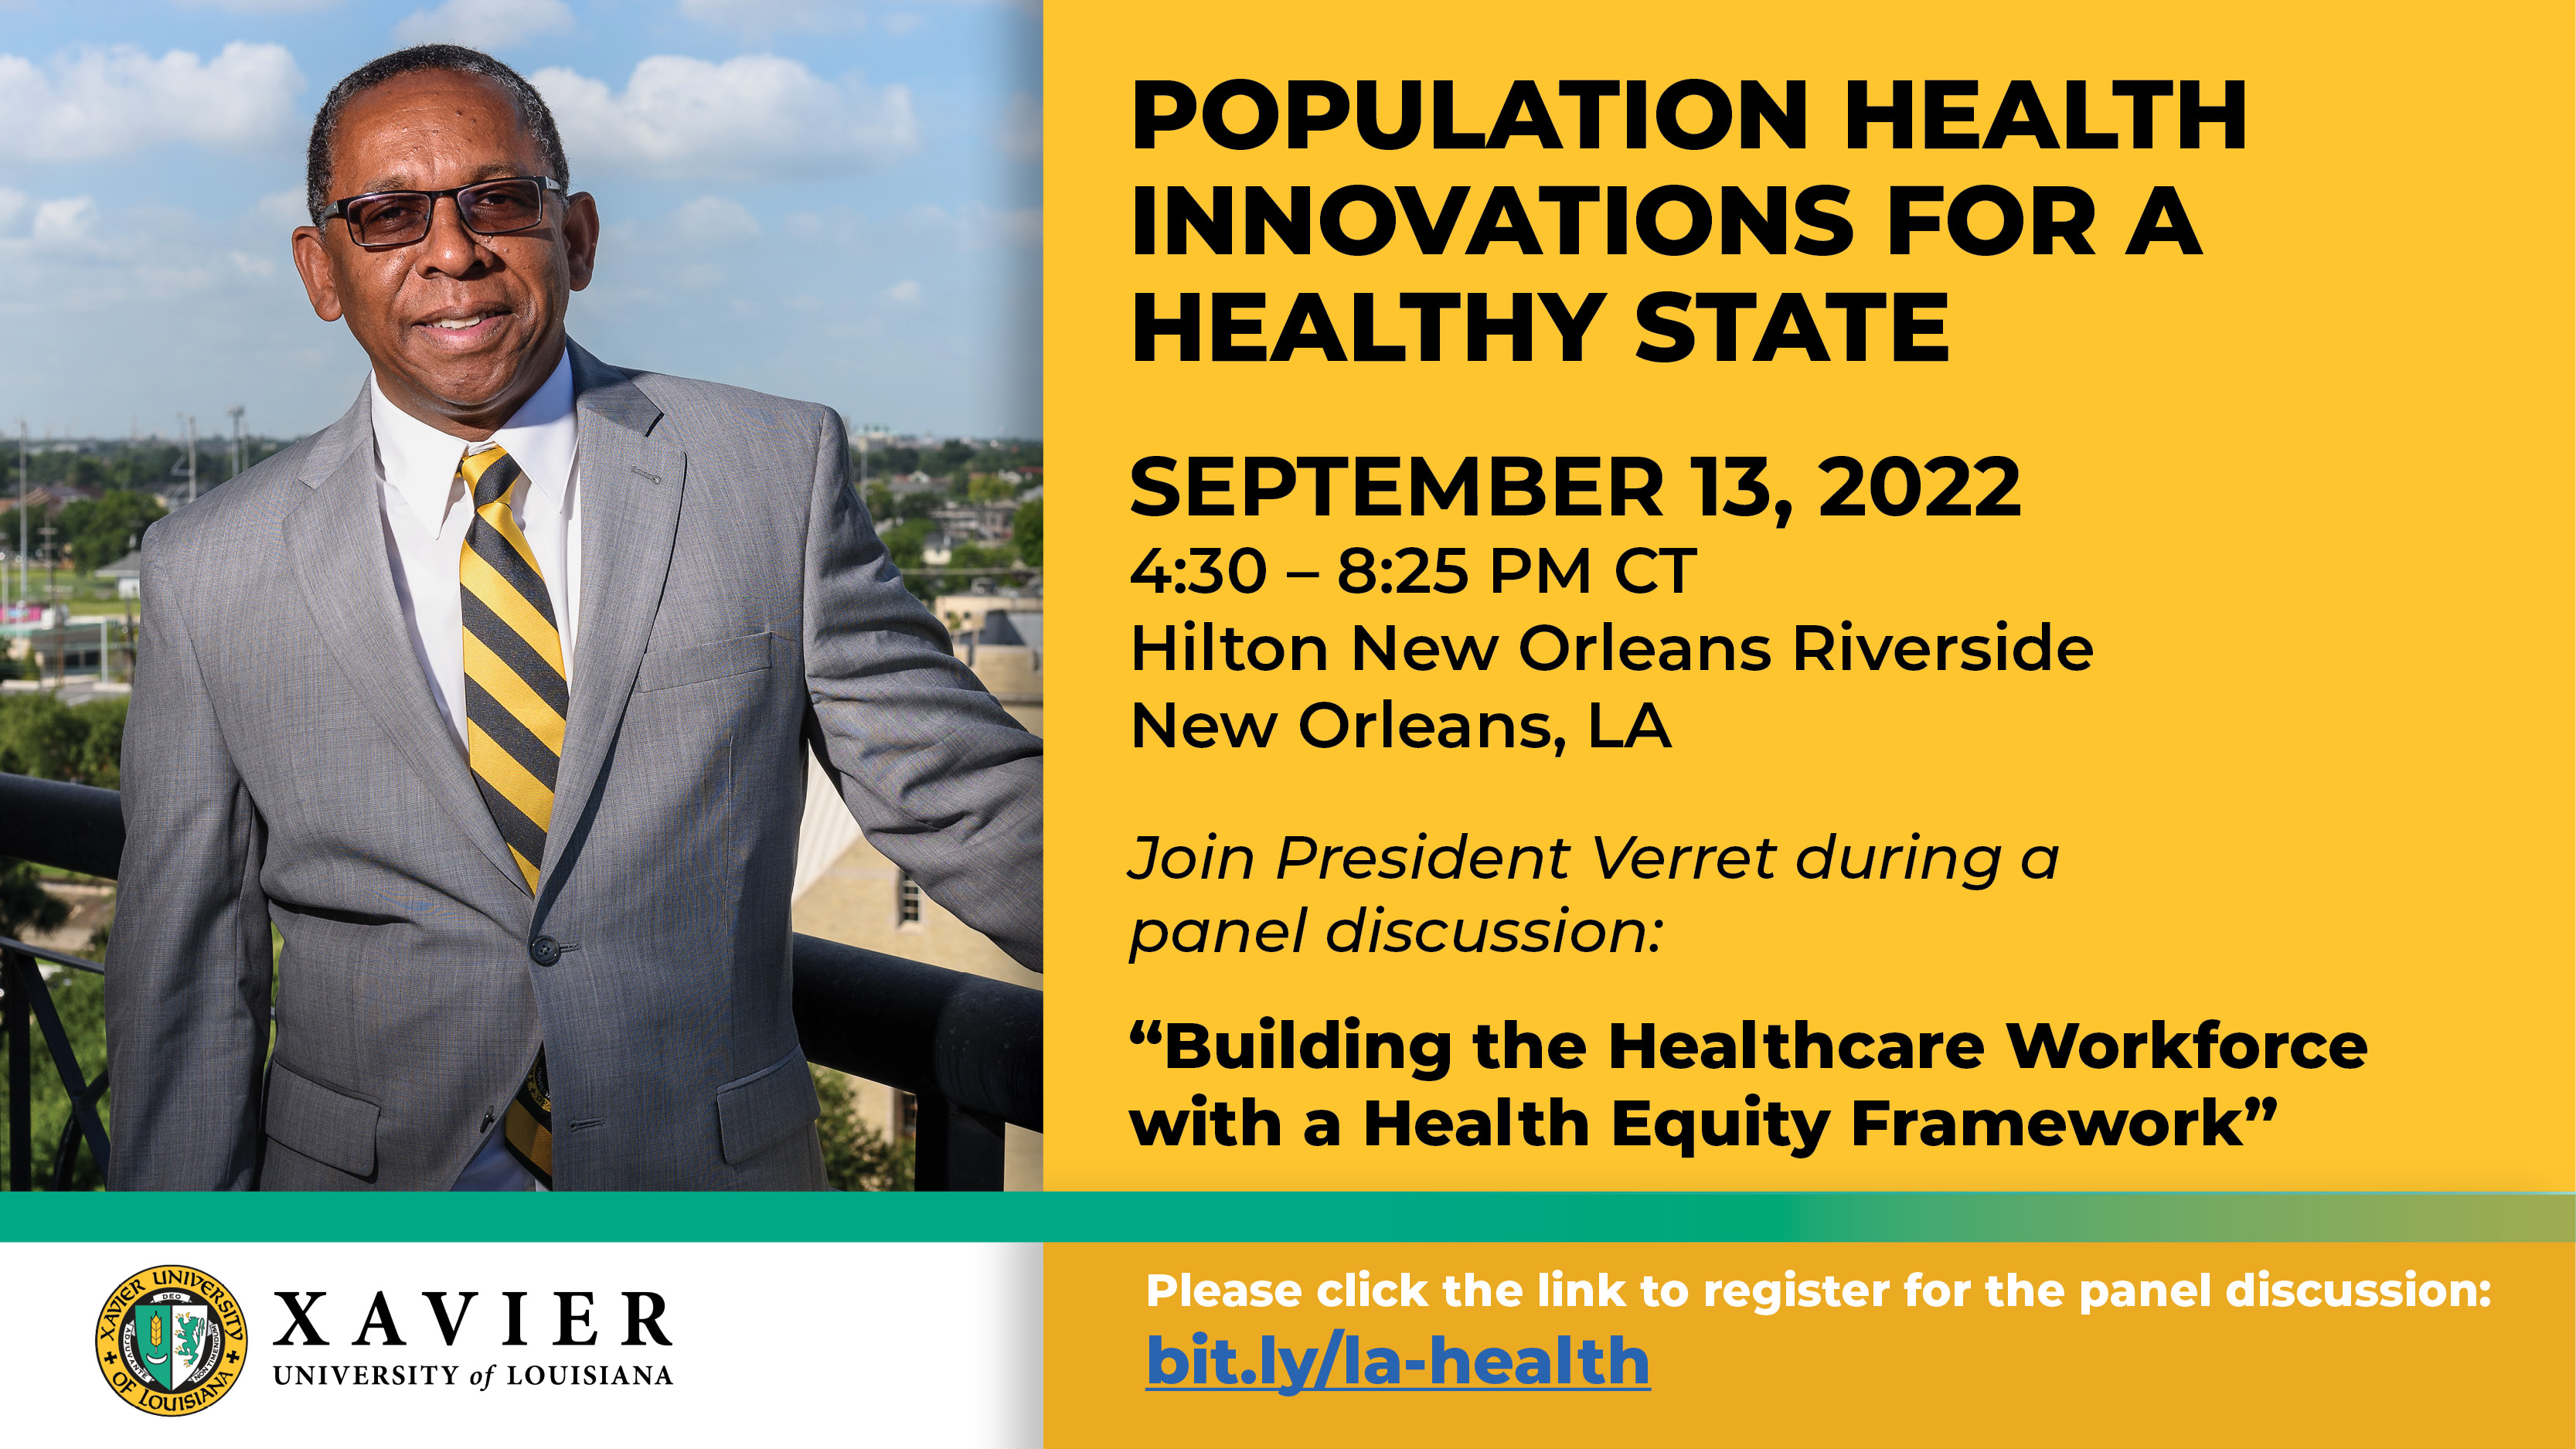 Dr. Reynold Verret, President of Xavier University of Louisiana, will join speakers and participants from around the state to explore innovations for a healthy state on September 13 at the Hilton Riverside in New Orleans.